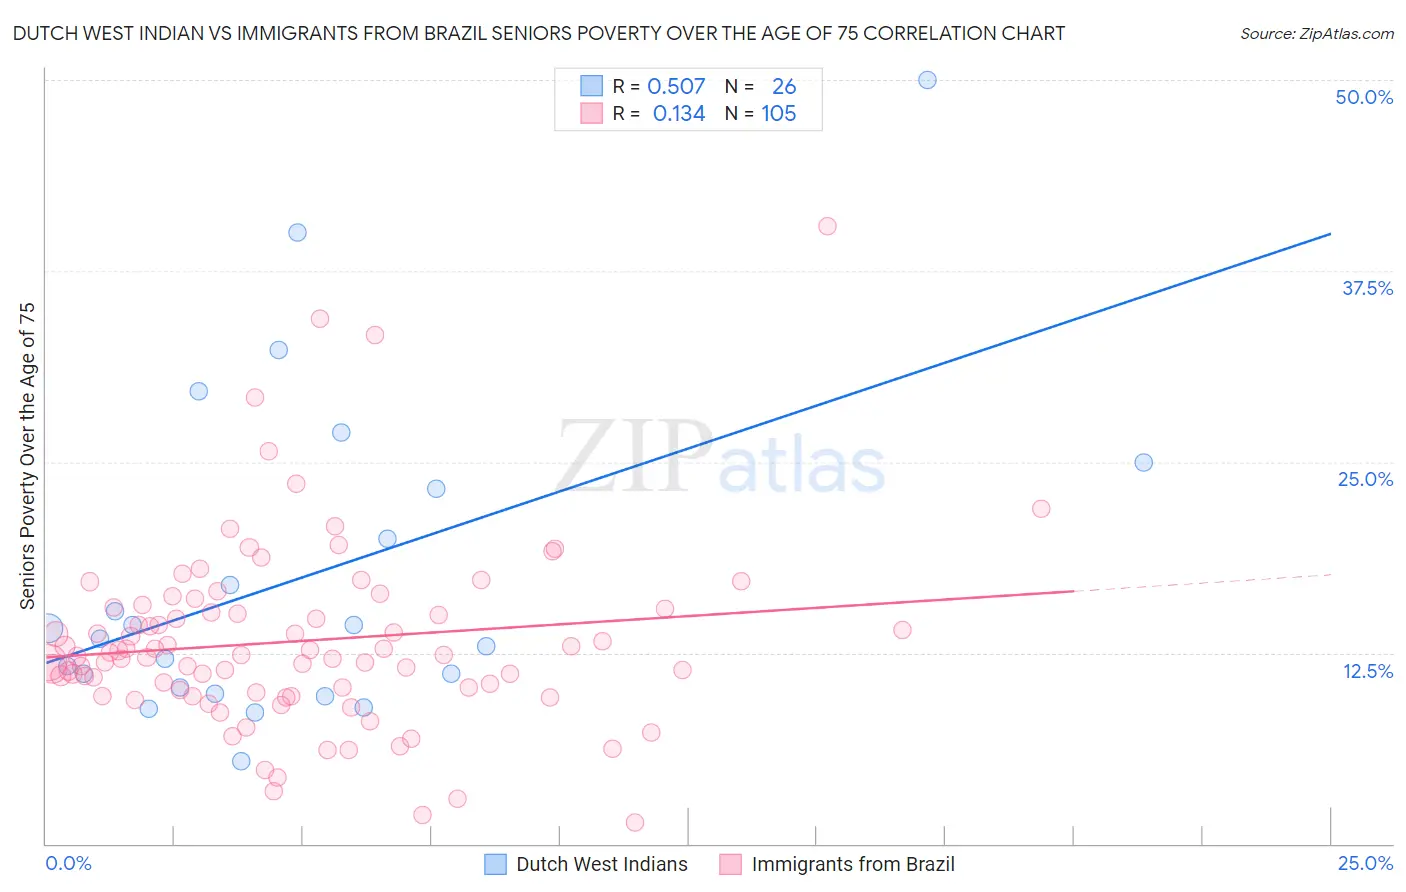 Dutch West Indian vs Immigrants from Brazil Seniors Poverty Over the Age of 75